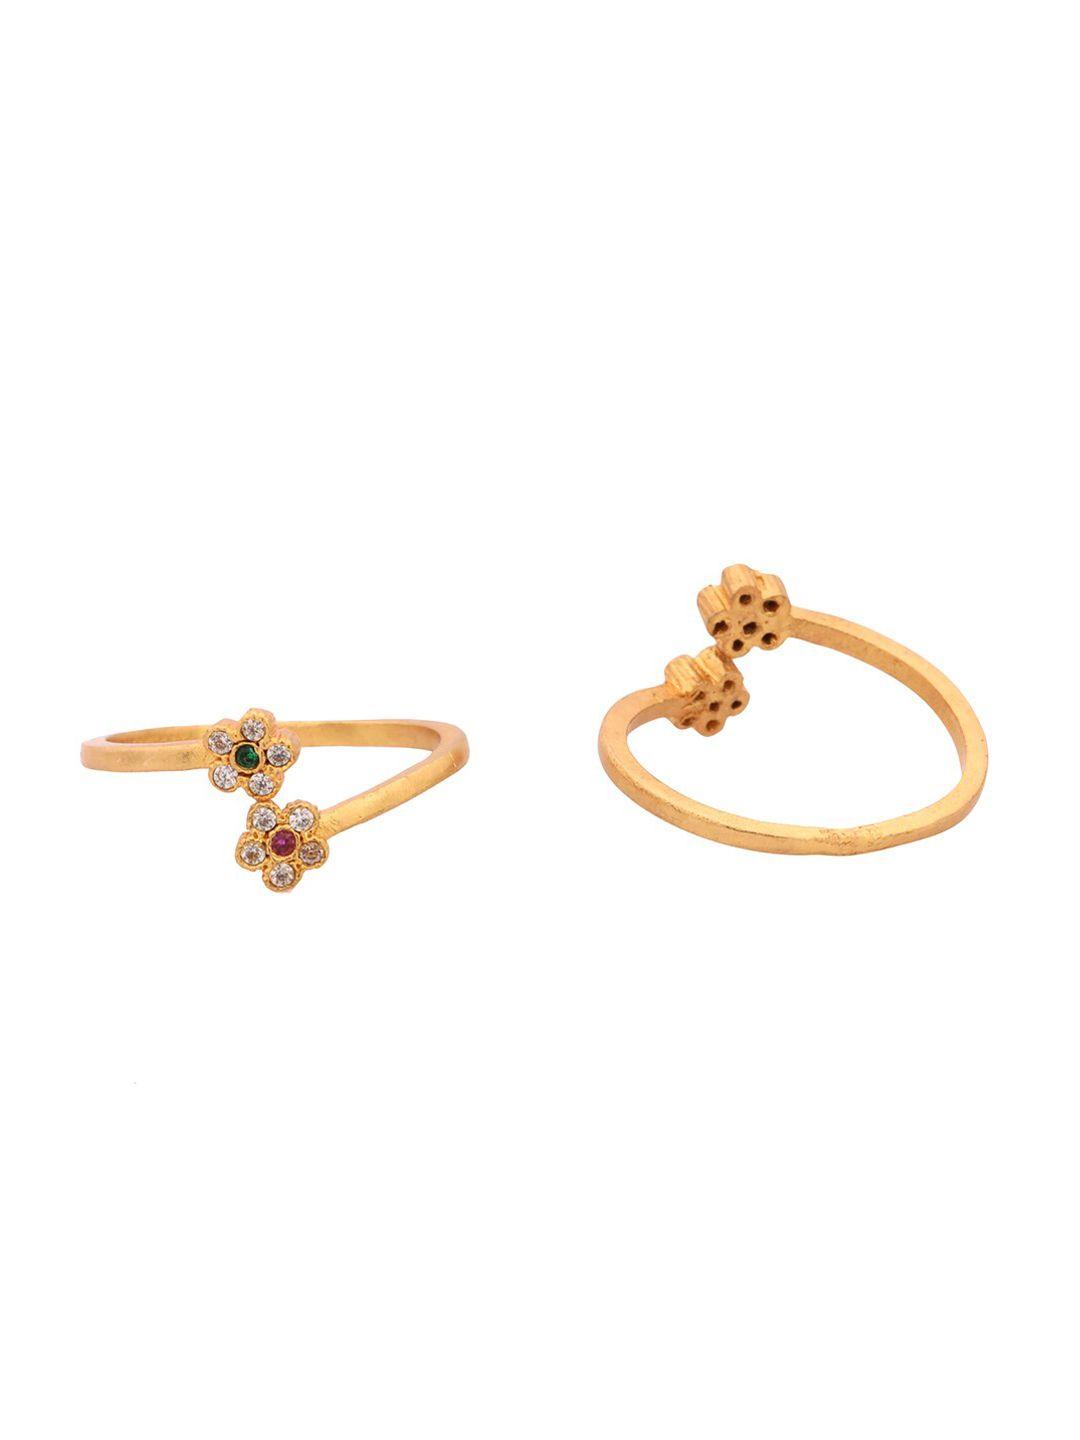 shoshaa set of 2 gold-plated white & pink stone-studded handcrafted toe rings